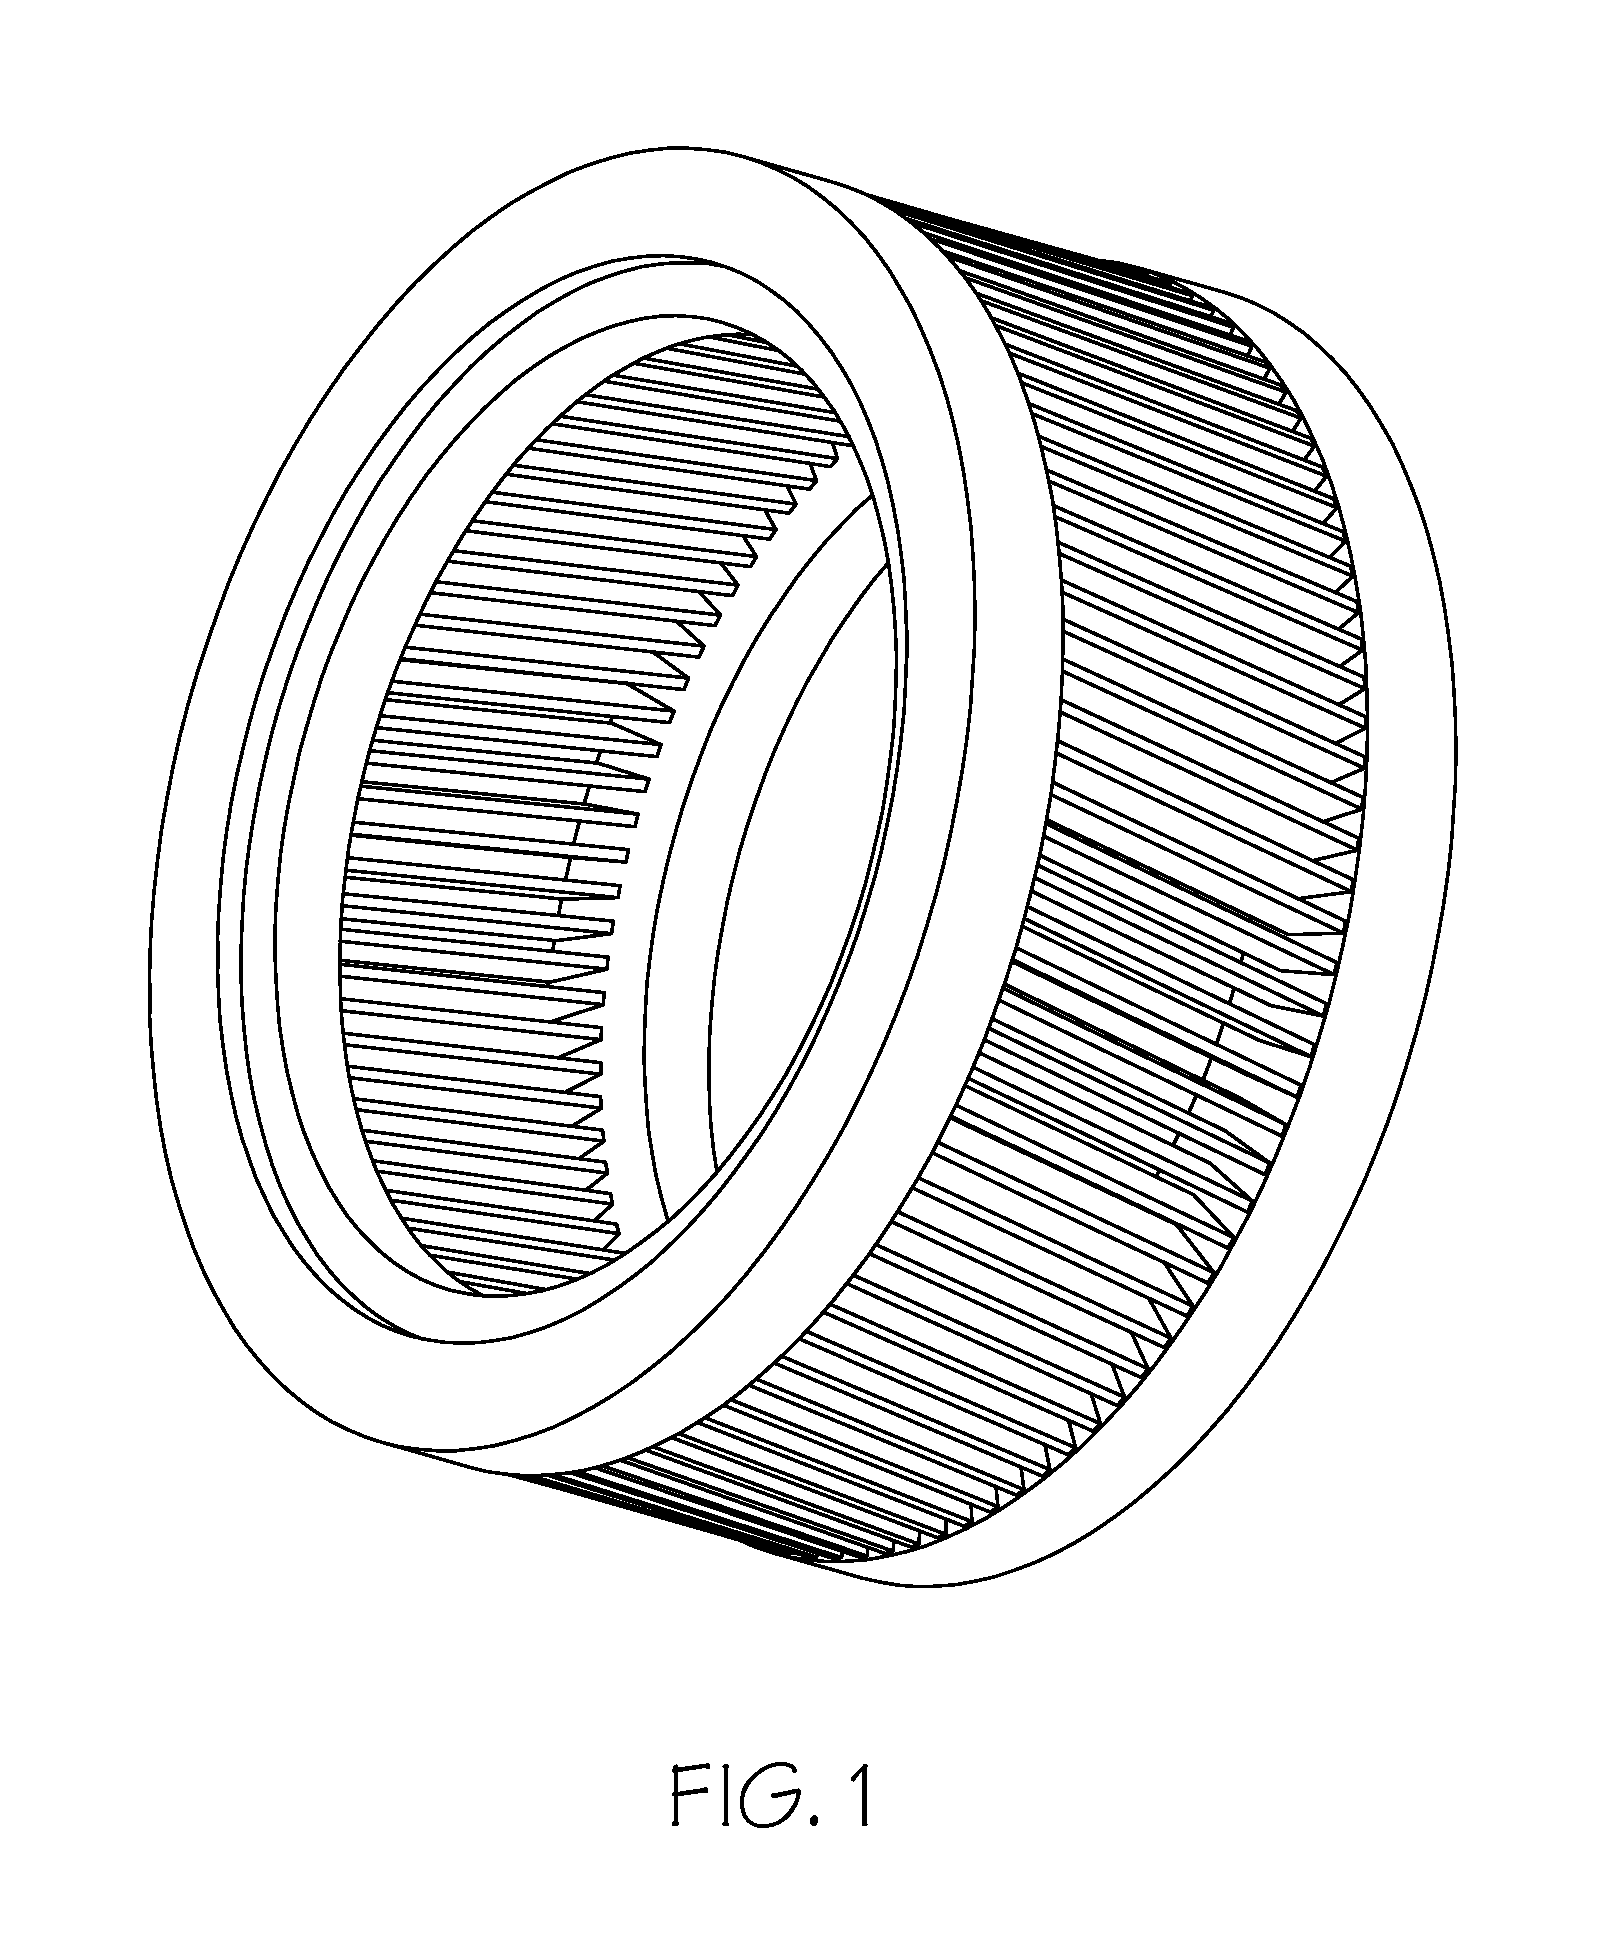 Solid phase welding of aluminum-based rotors for induction electric motors